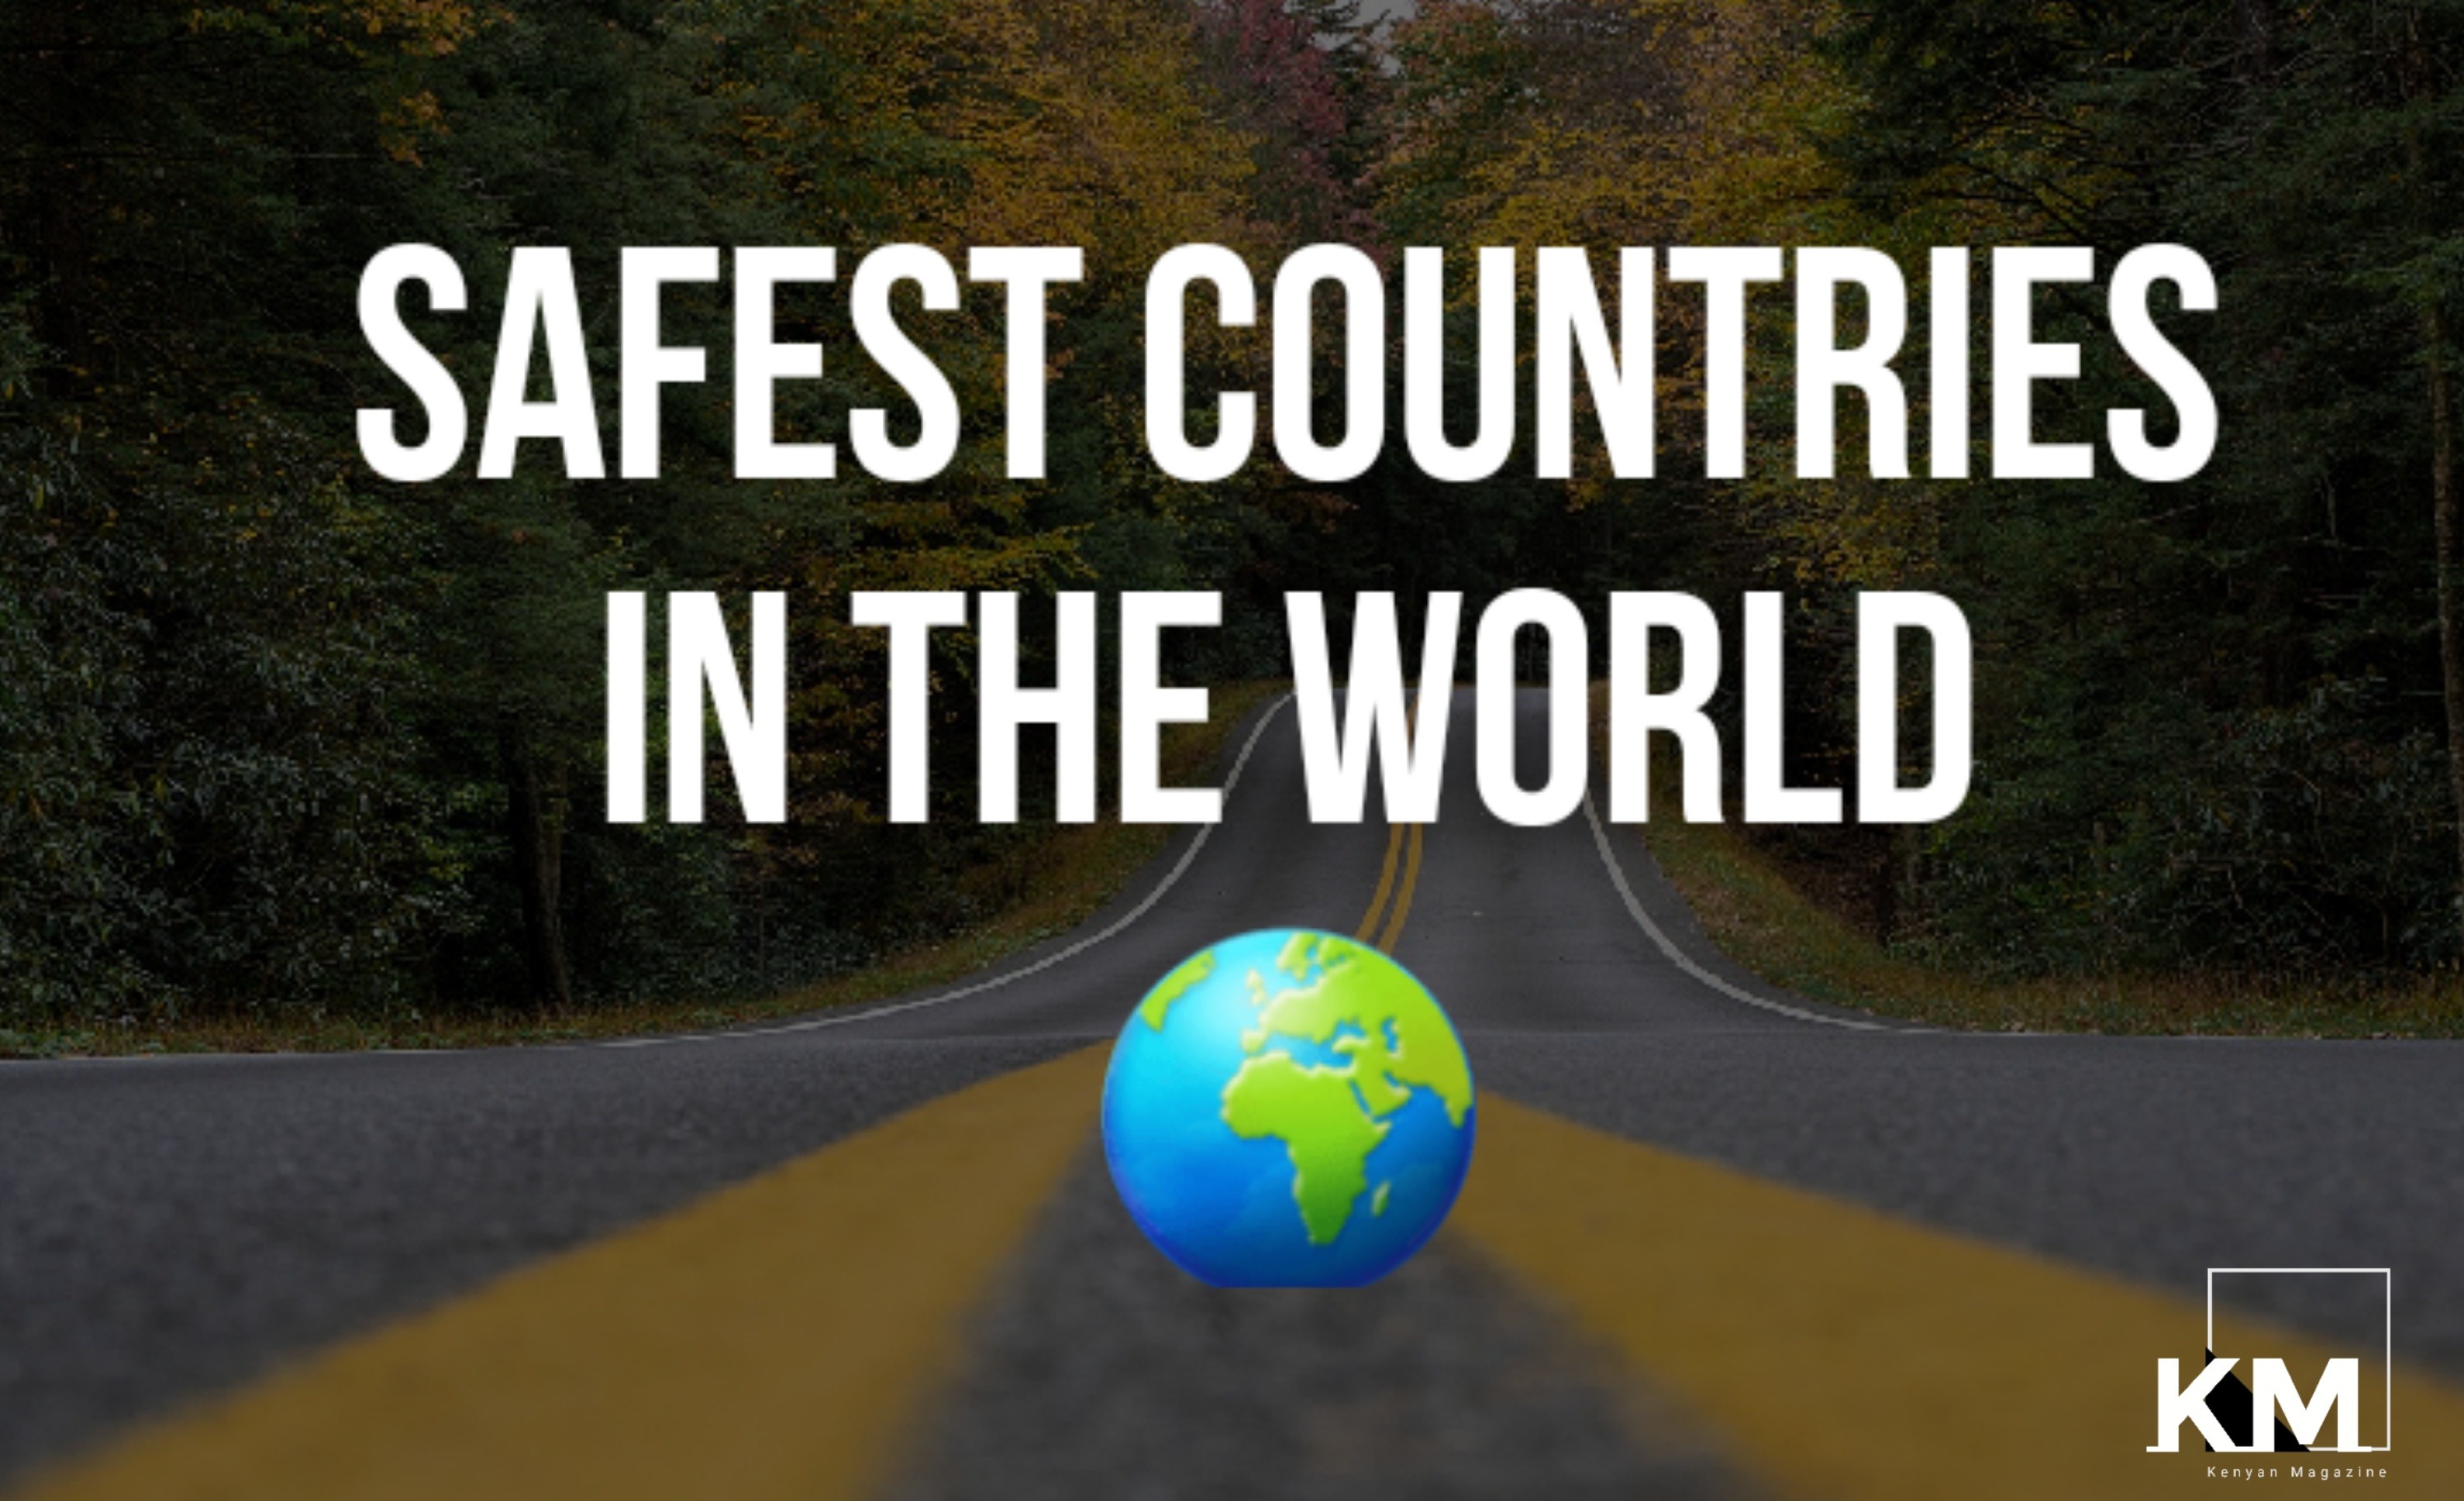 Safest Countries in the world